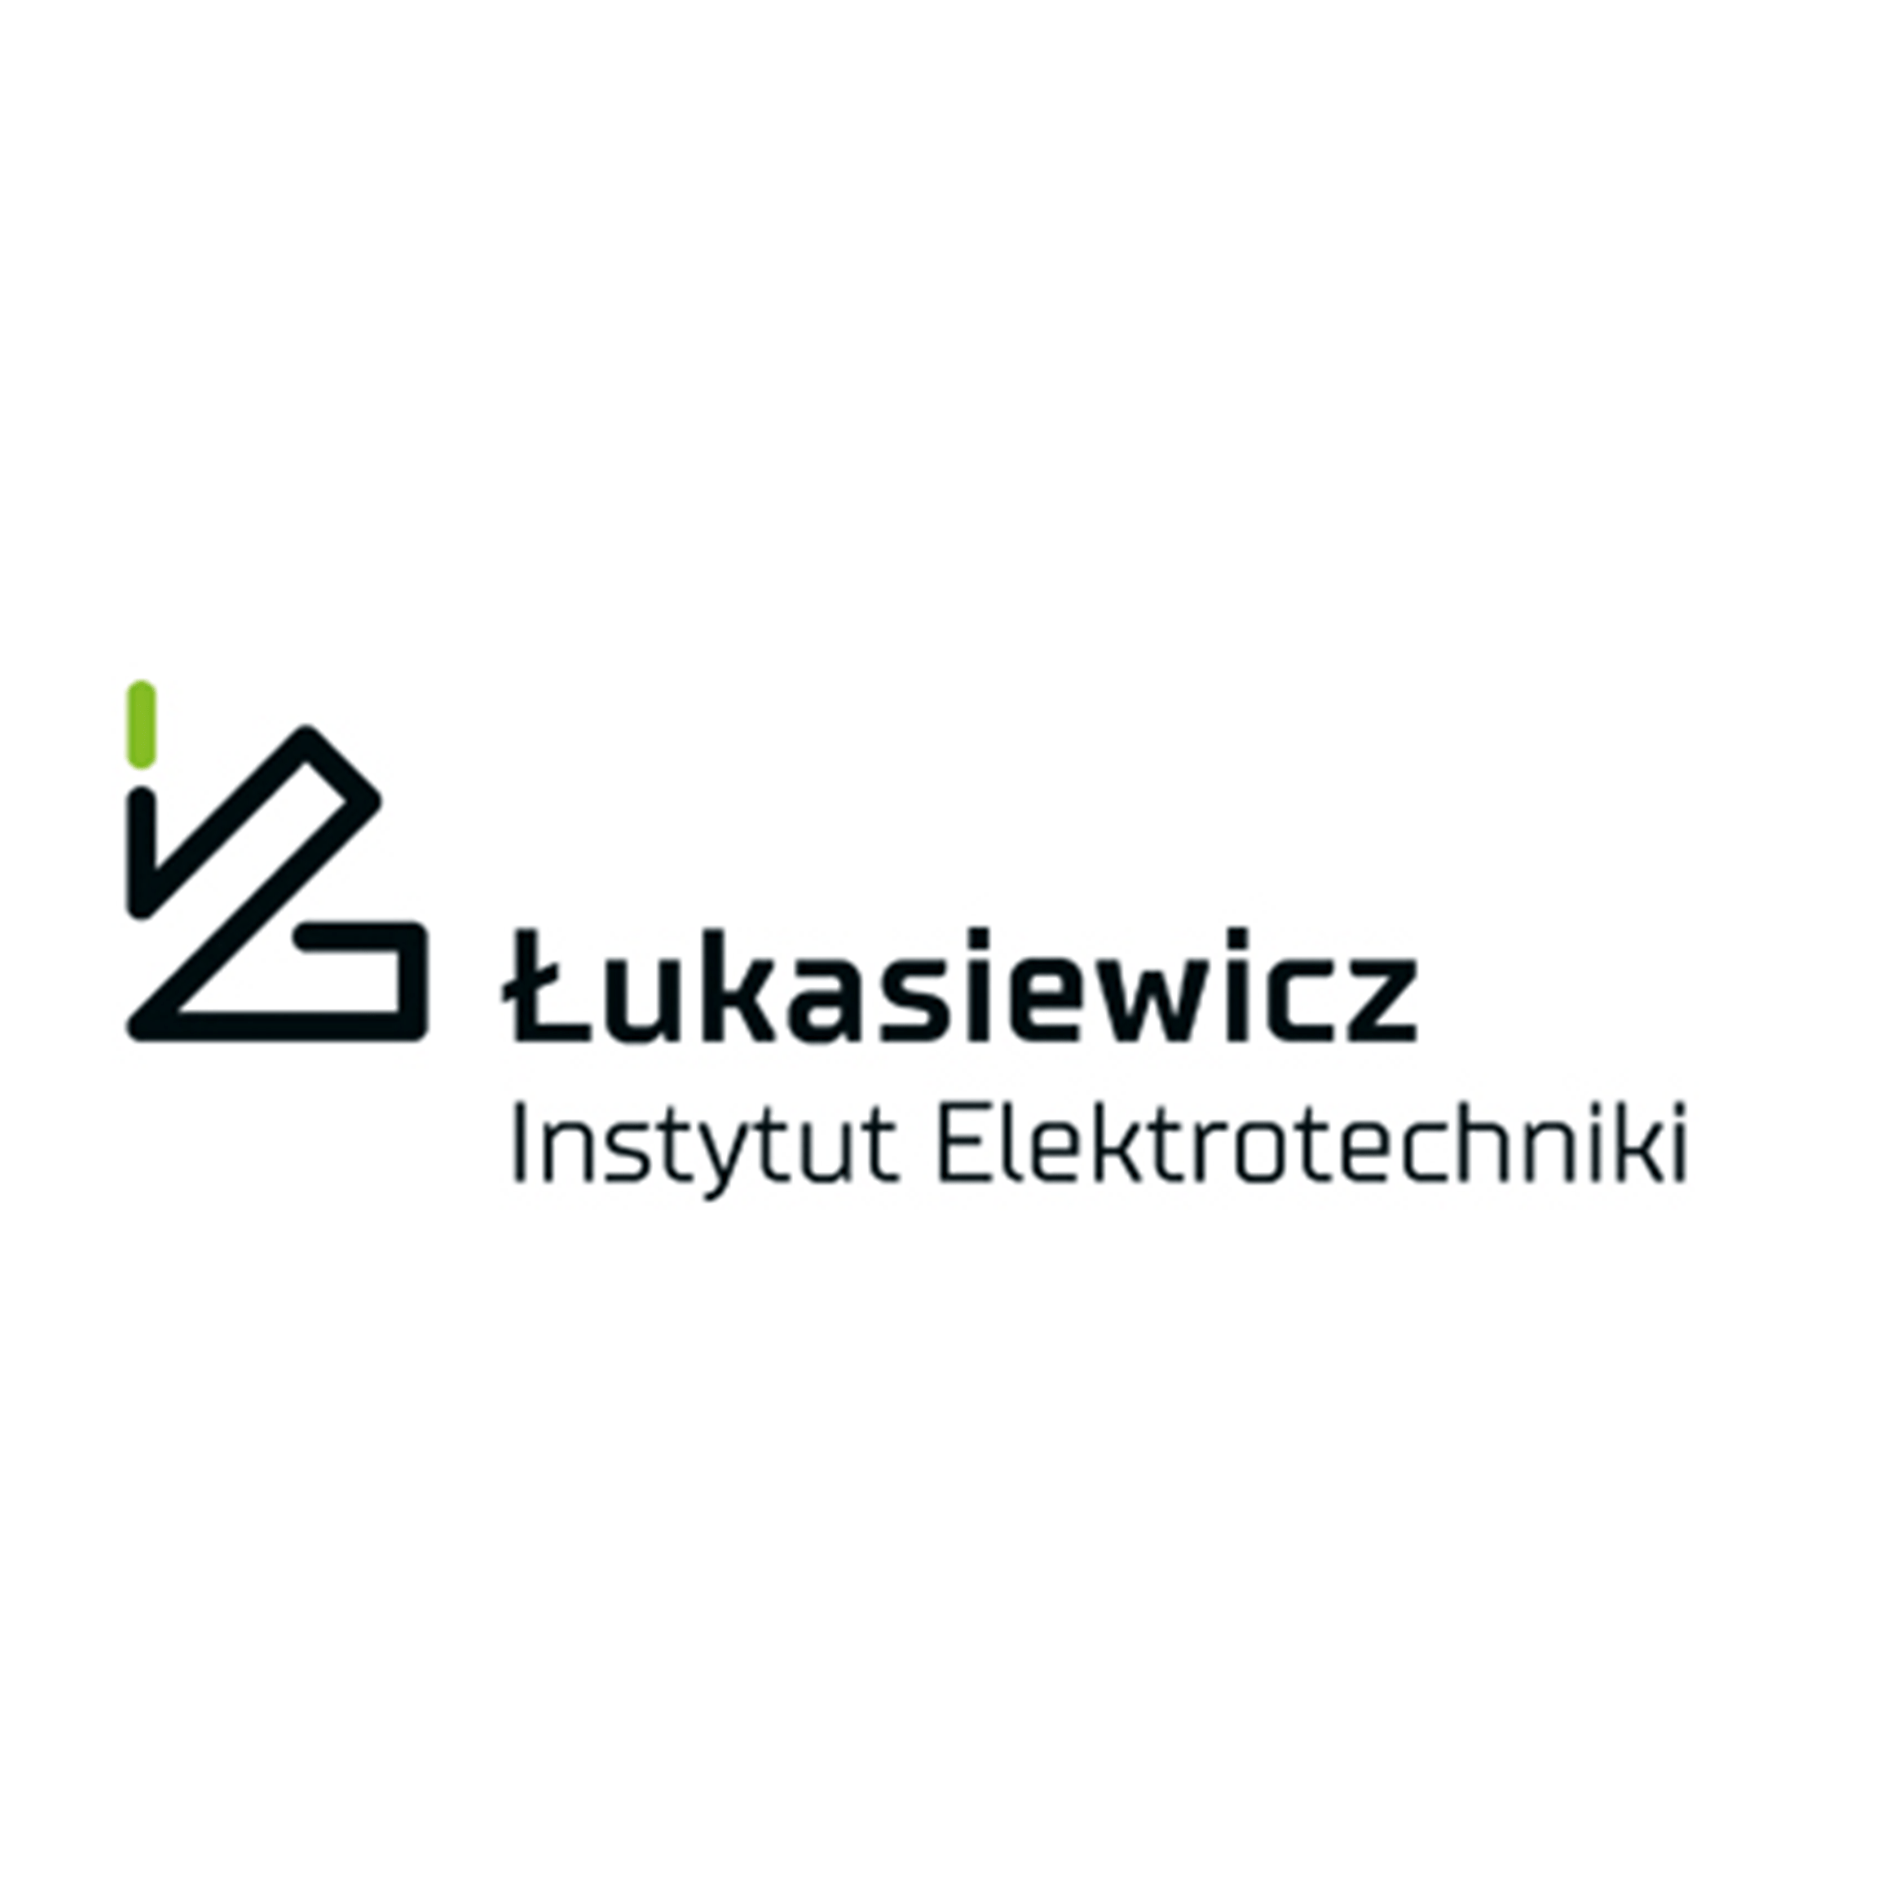 The Institute of Electrotechnology is one of the largest Institutes in Poland.